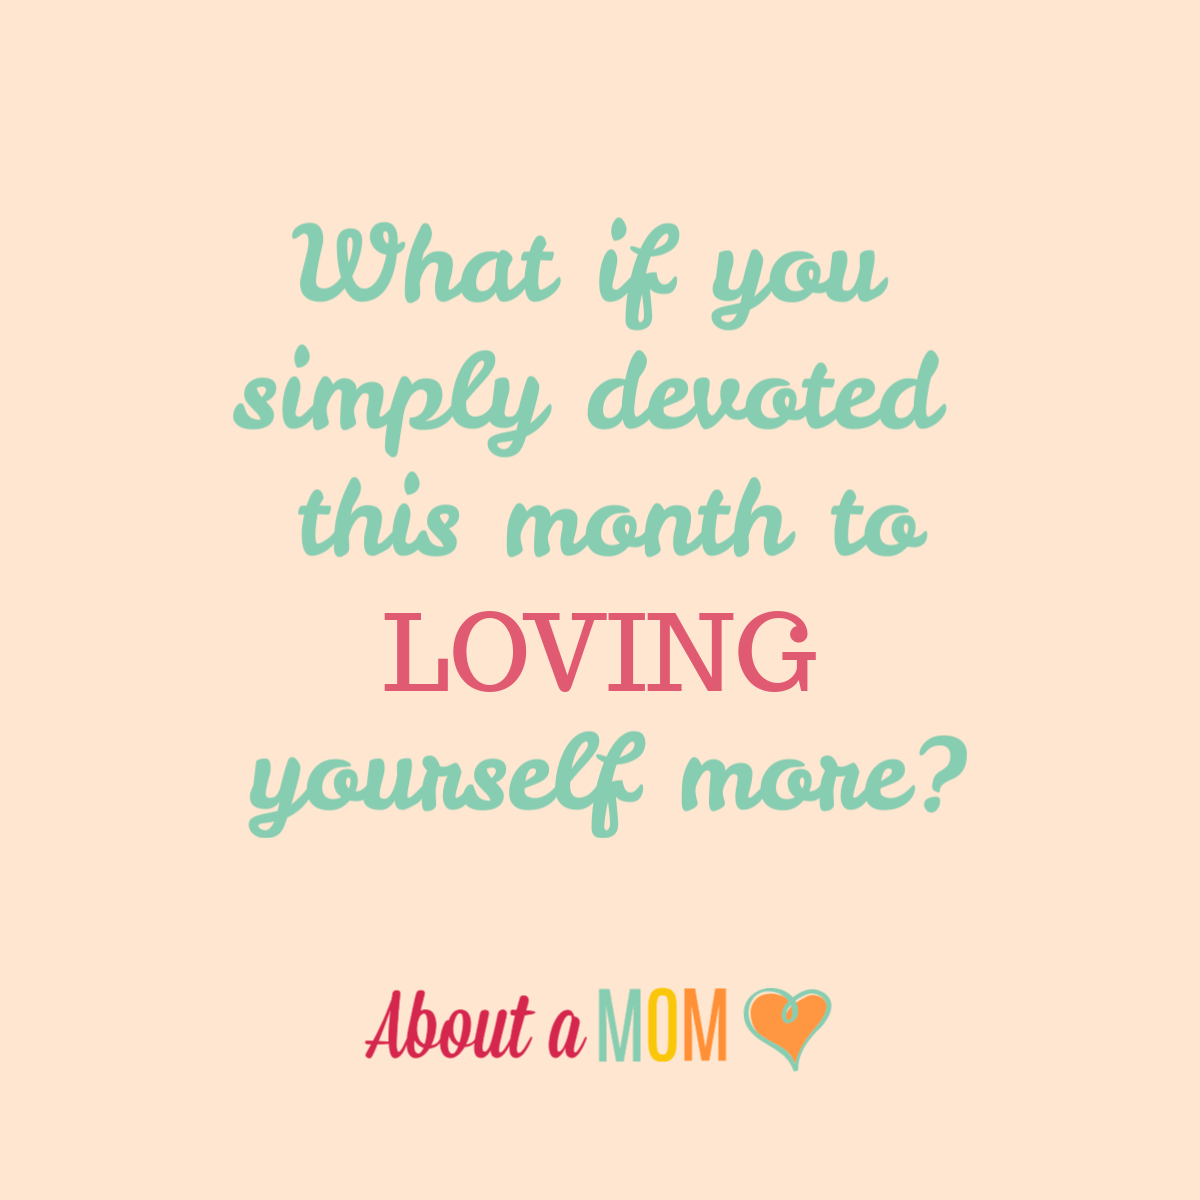 February is known as the month for love. The most important person you can show love to is yourself. Take About A Mom's February Self Love Challenge and challenge yourself for 30 days to show self love.